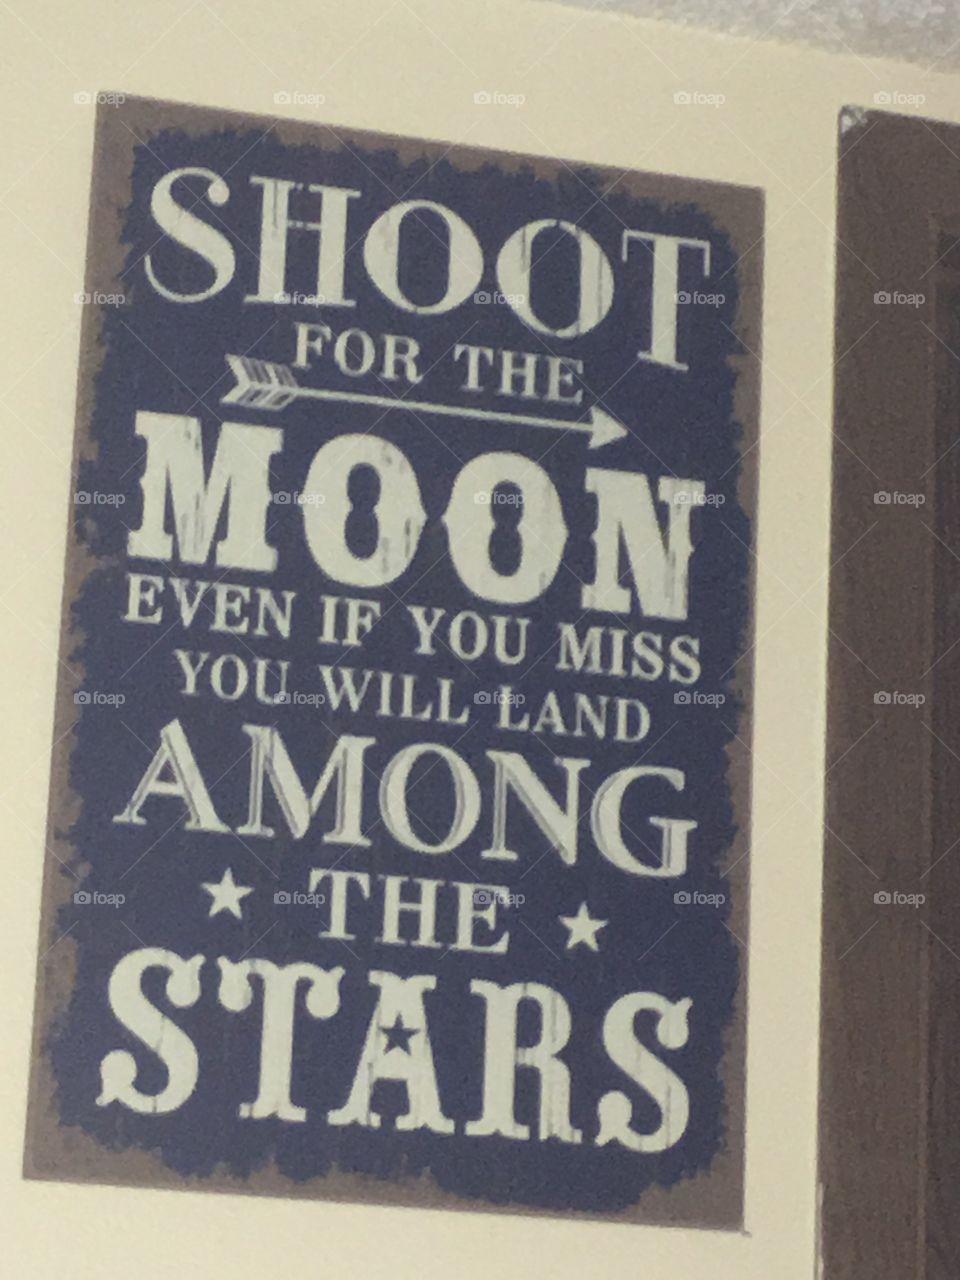 Shoot for the moon. Even if you miss you will land among the stars. 